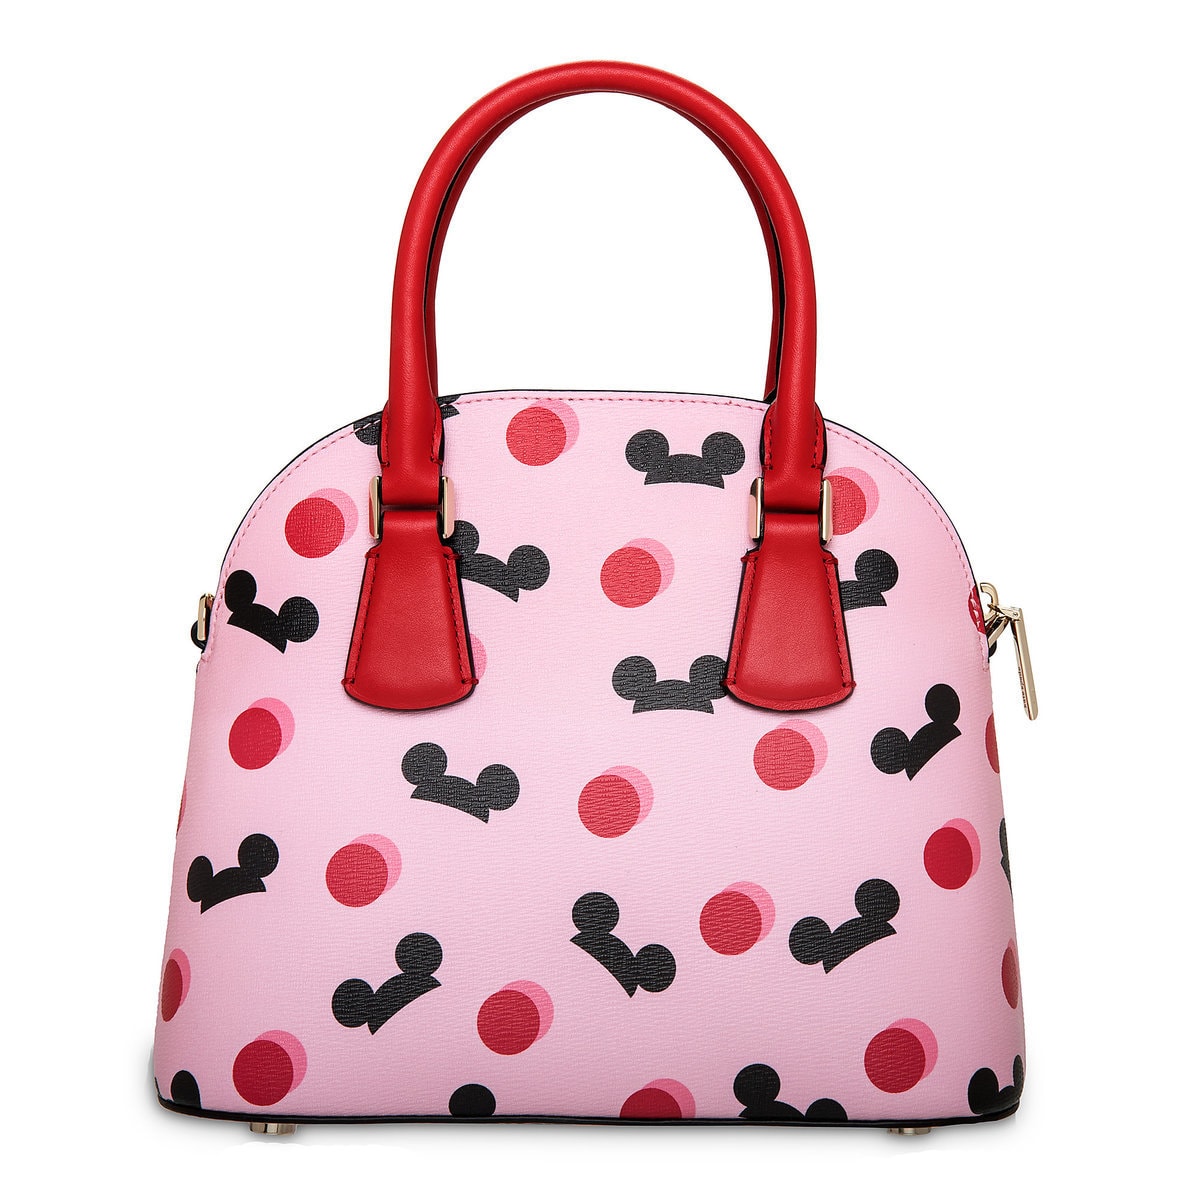 Disney Mickey Mouse Ear Hat Small Satchel Pink Kate Spade New York New with Tag